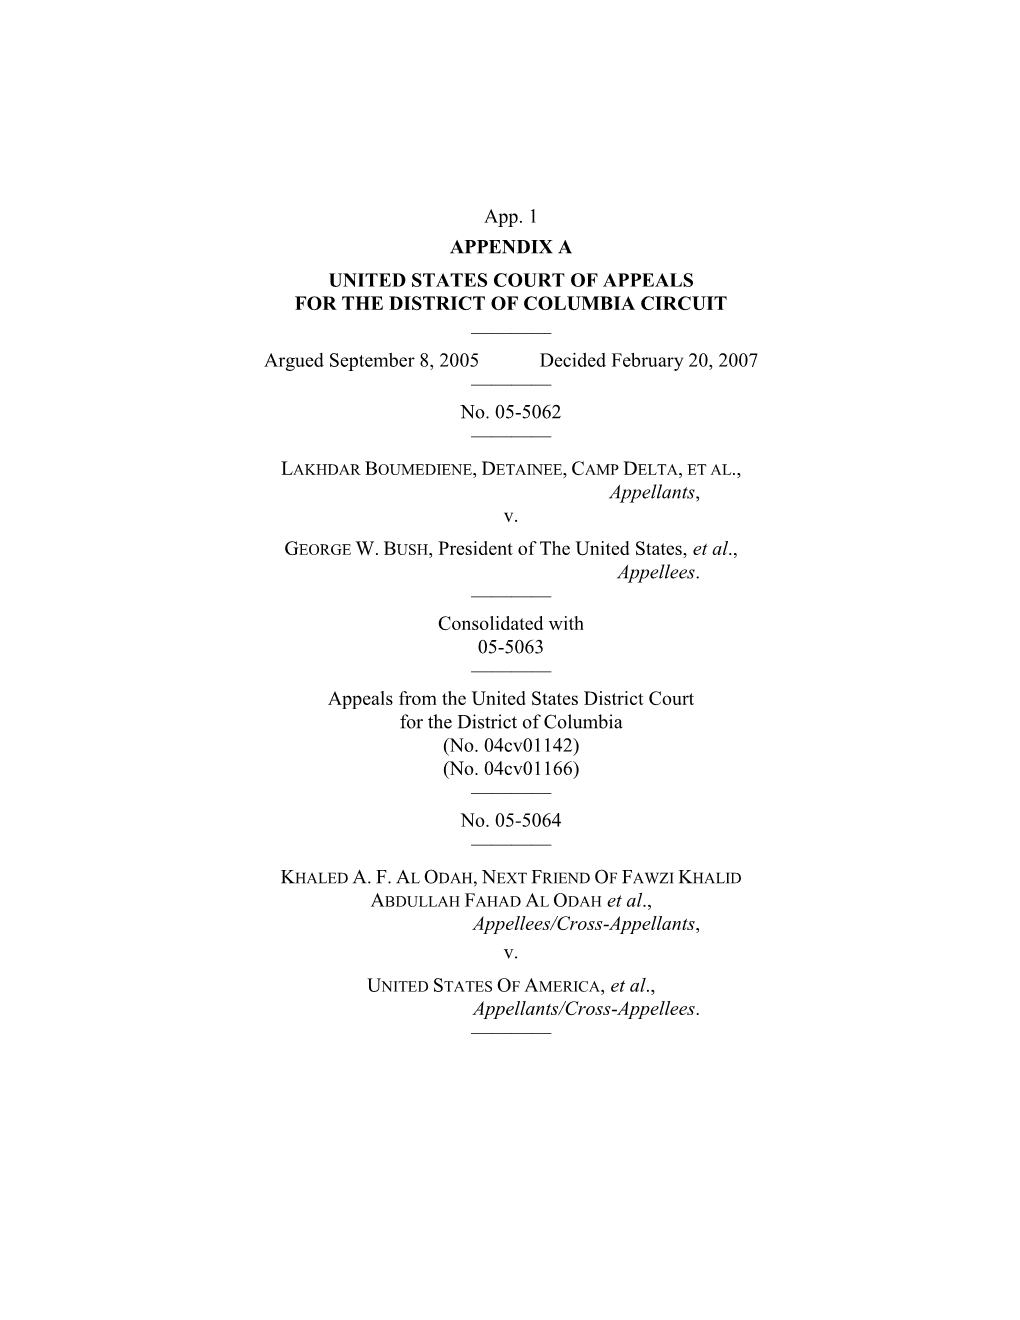 App. 1 APPENDIX a UNITED STATES COURT of APPEALS for the DISTRICT of COLUMBIA CIRCUIT ———— Argued September 8, 2005 Decided February 20, 2007 ———— No